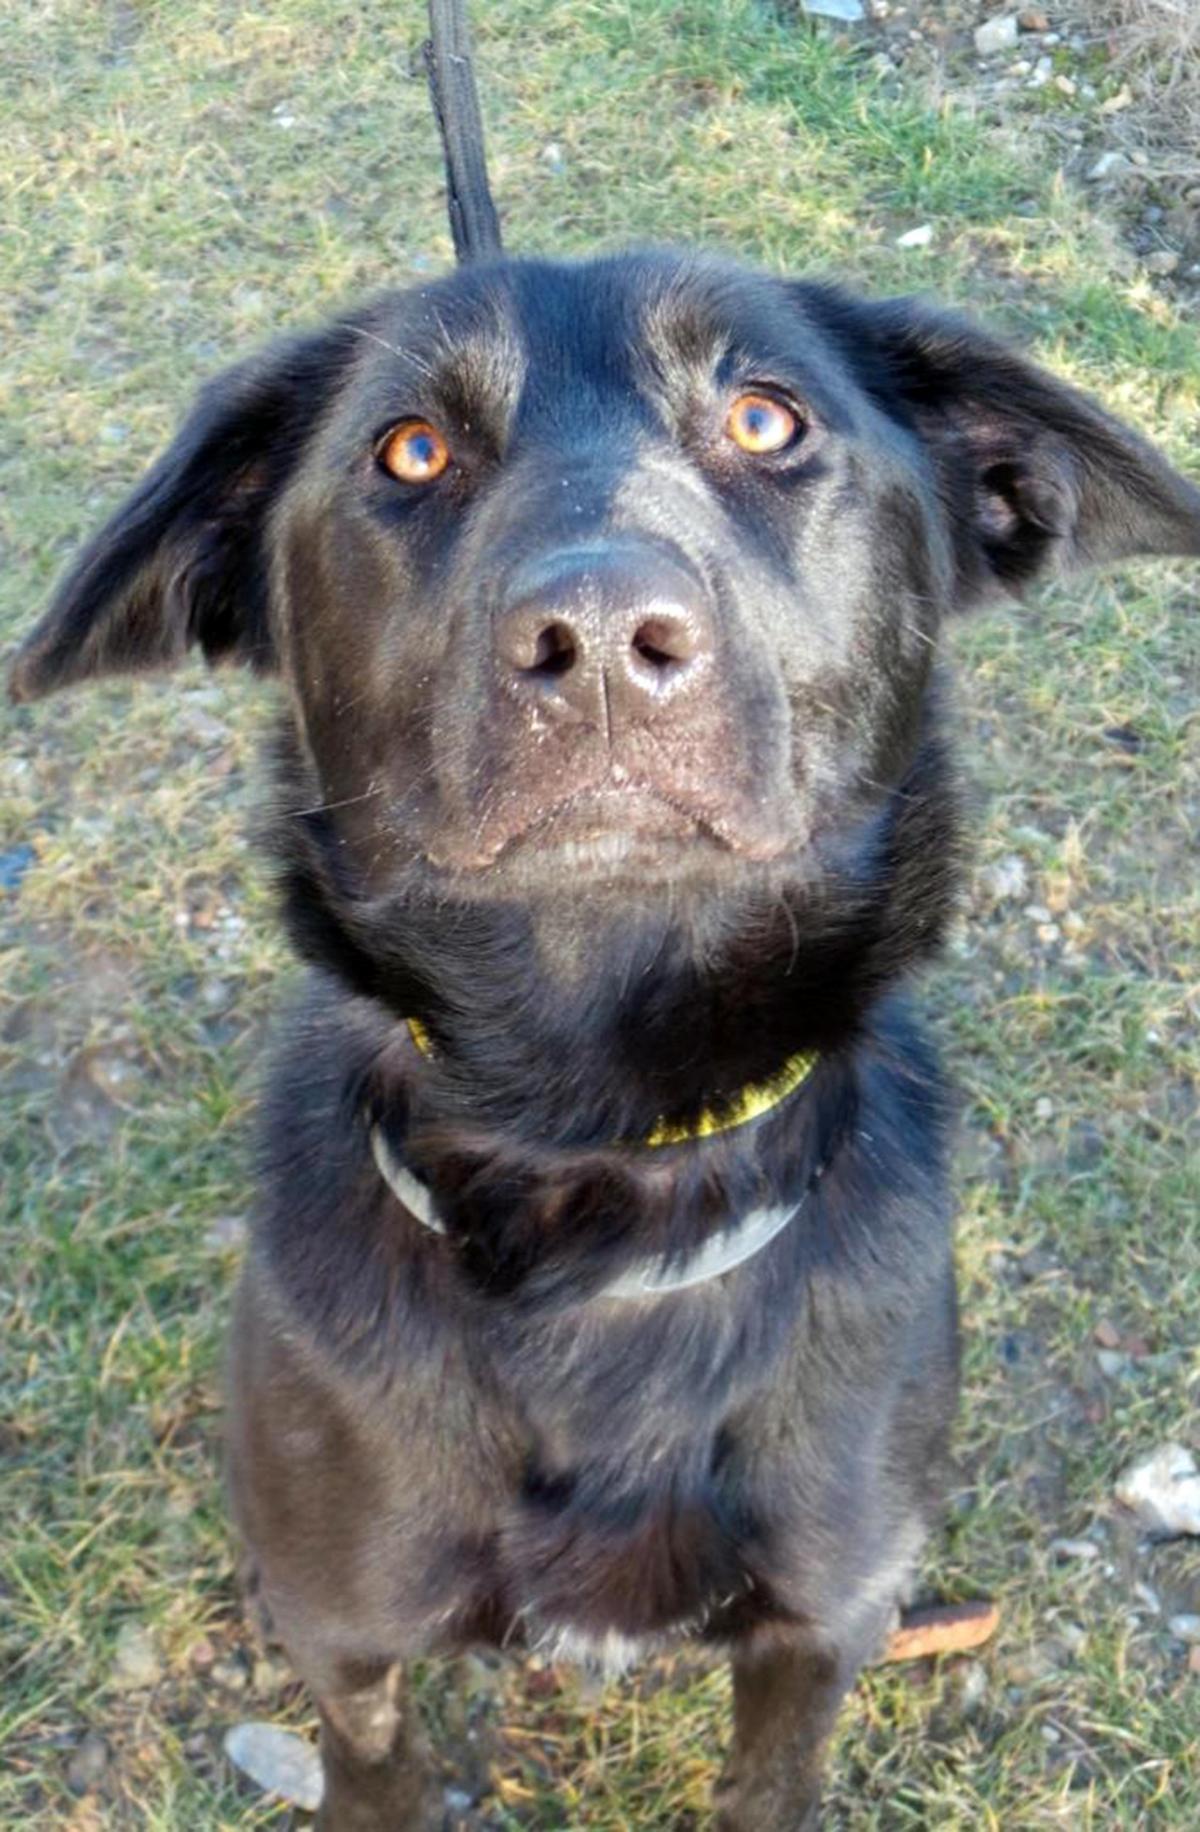 03/03/15
Greta – One year old female Labrador cross
Greta is lively but can be worried by new things, so needs patient  owners. Greta would be best suited to a home with adults and older teens. She will benefit from  socialisation with people and dogs